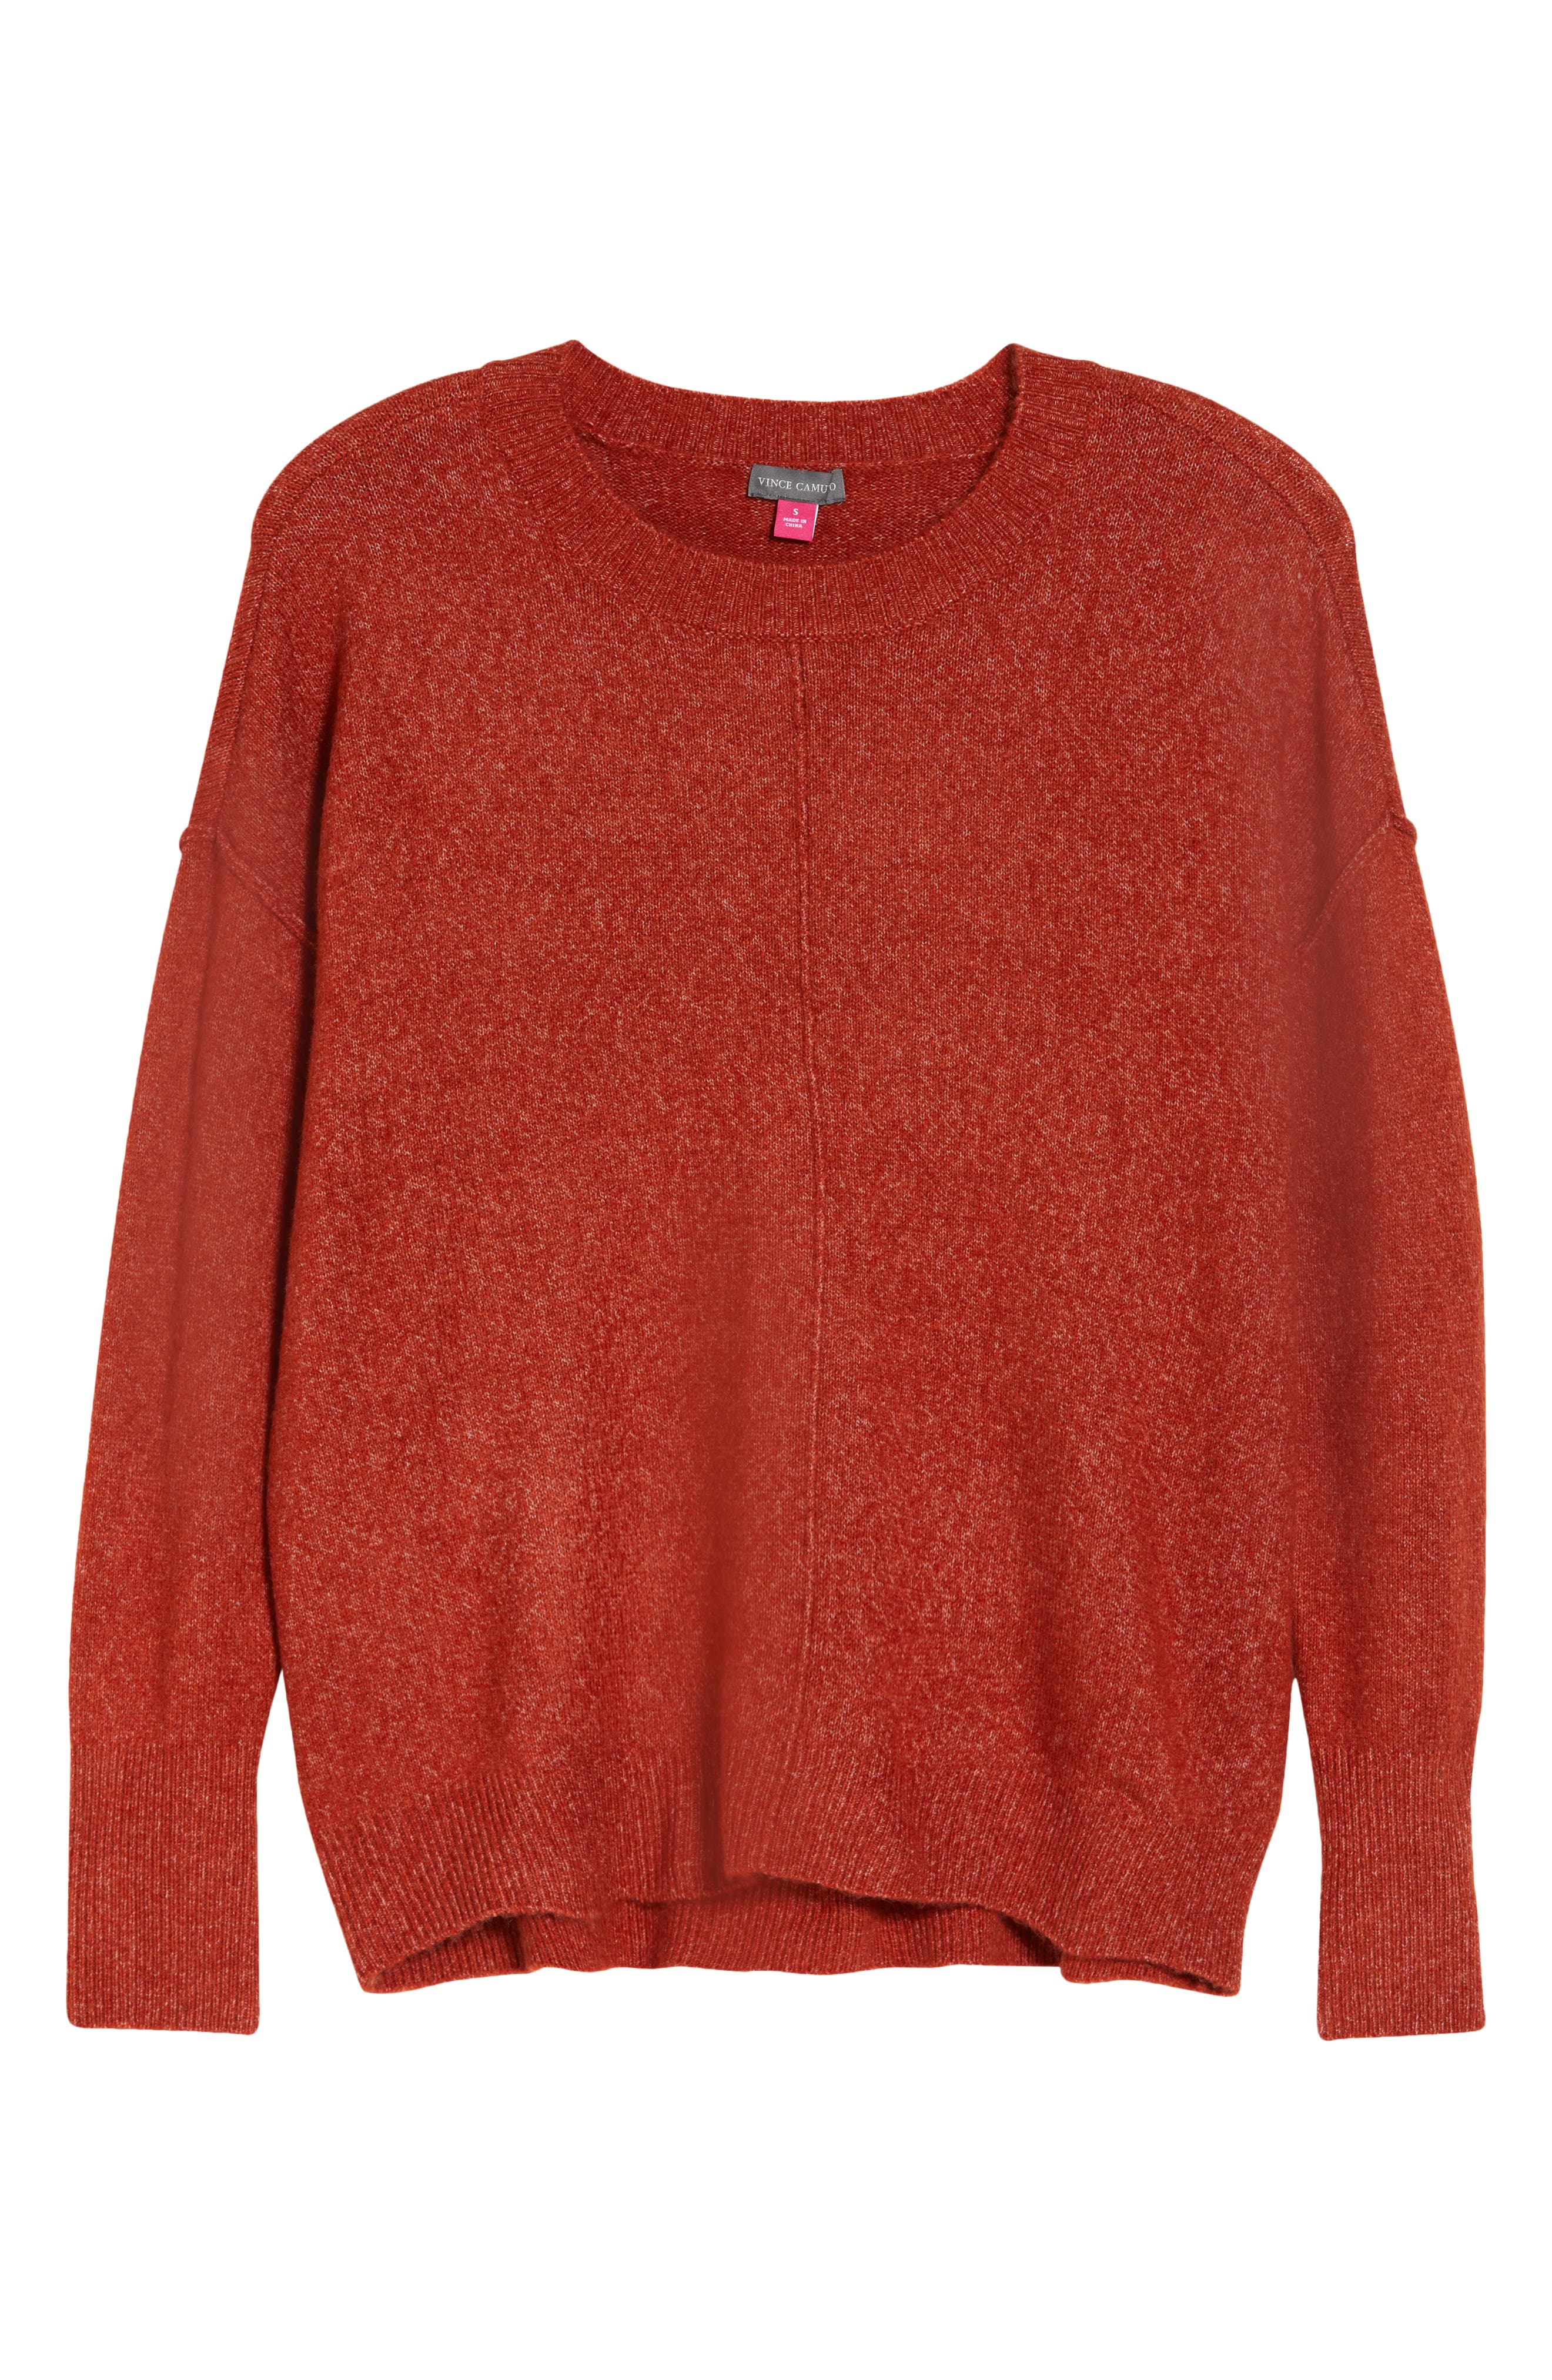 Vince Camuto - Cozy Seam Sweater in Amber at Nordstrom